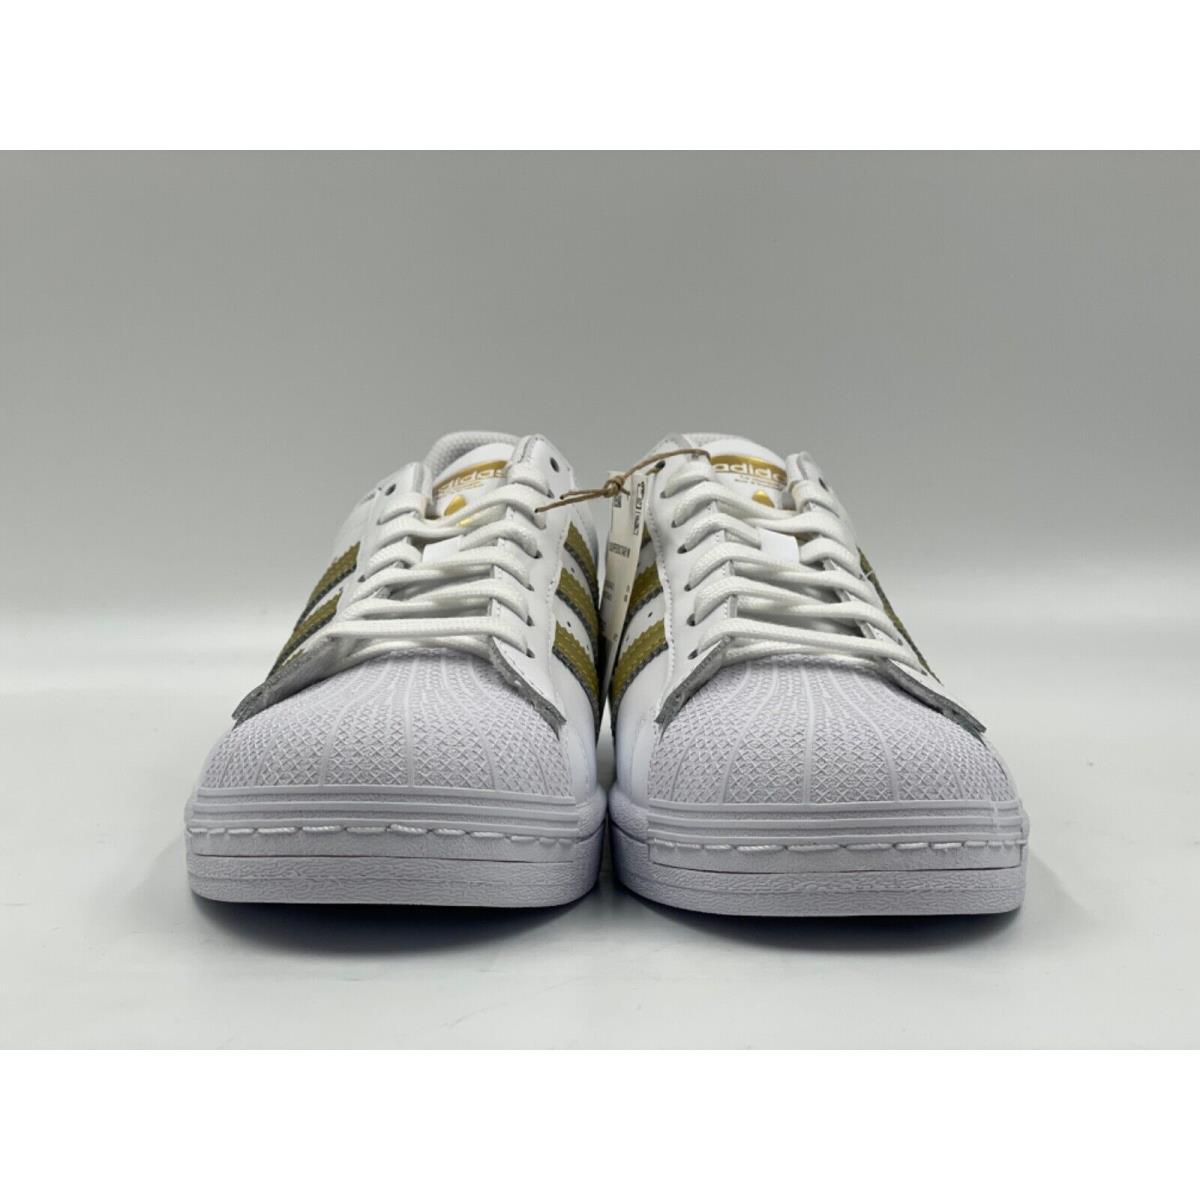 Adidas shoes Superstar - White Gold 7